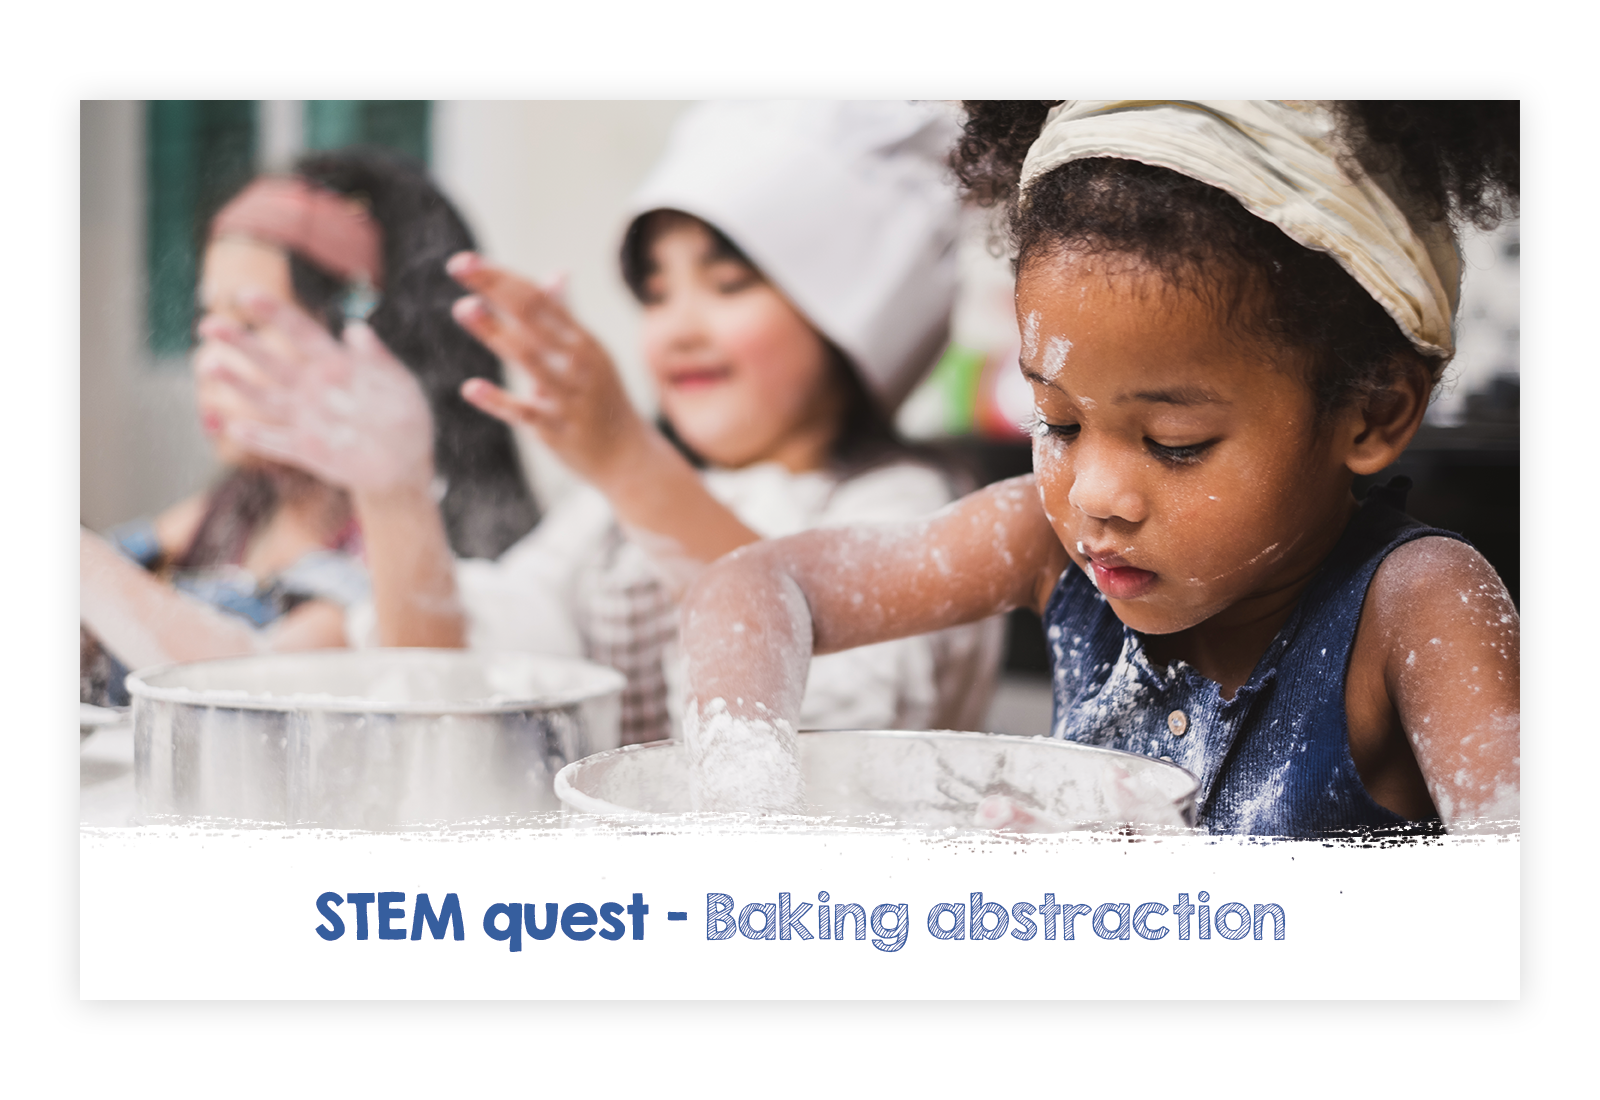 STEM Family Quest – Baking Abstraction